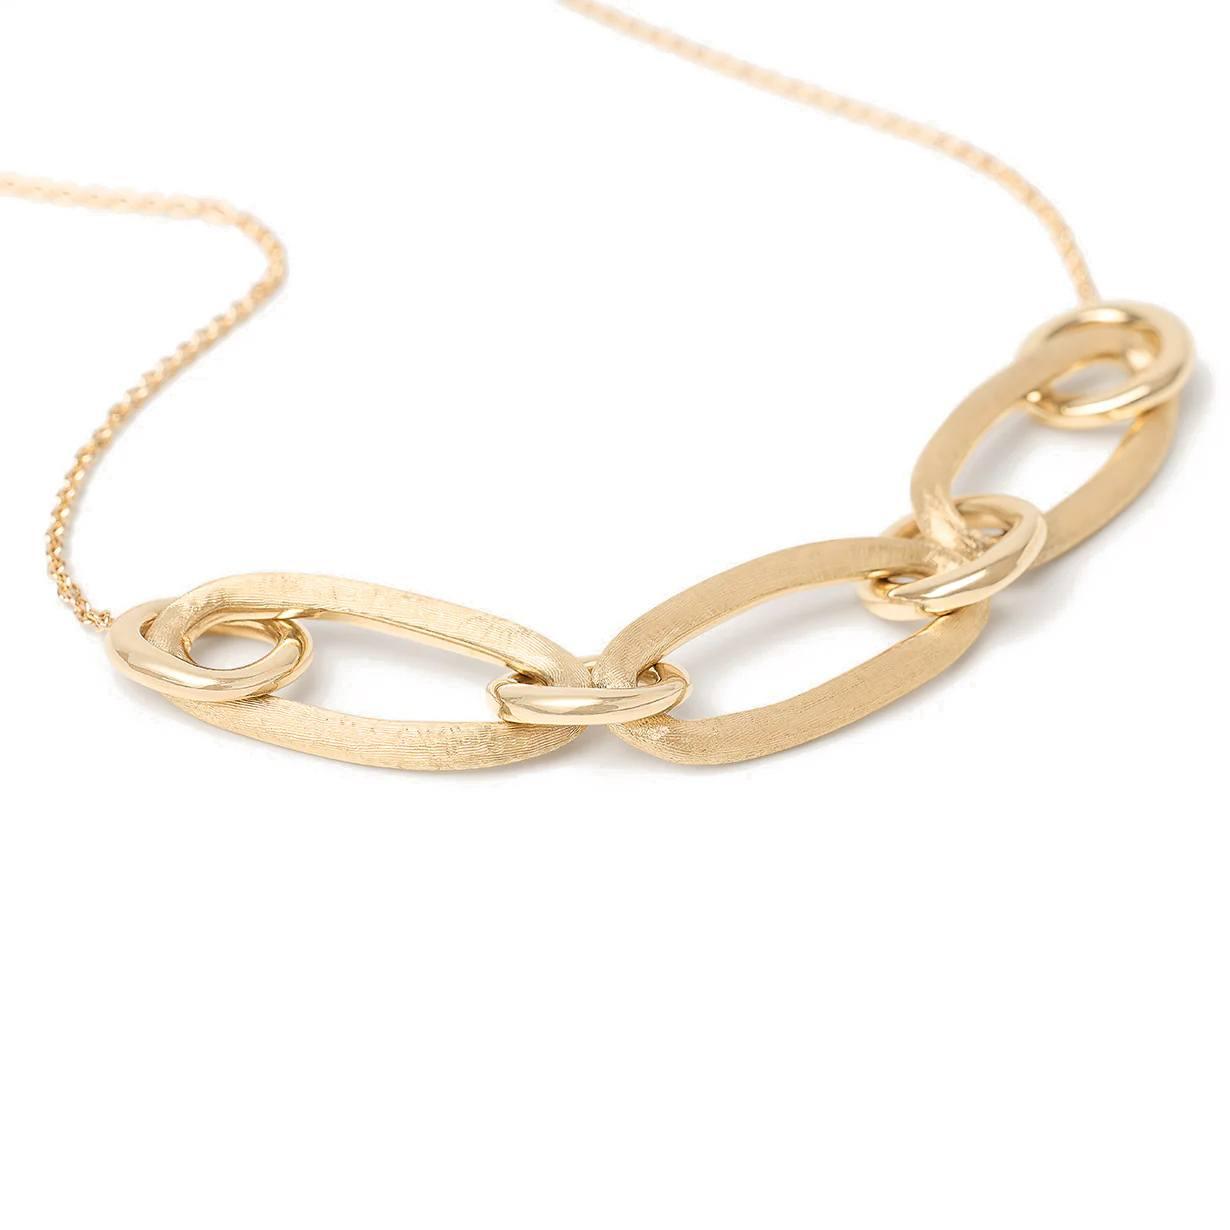 Marco Bicego Jaipur Link Collection 18K Yellow Gold Mixed Link Half Collar Necklace 2